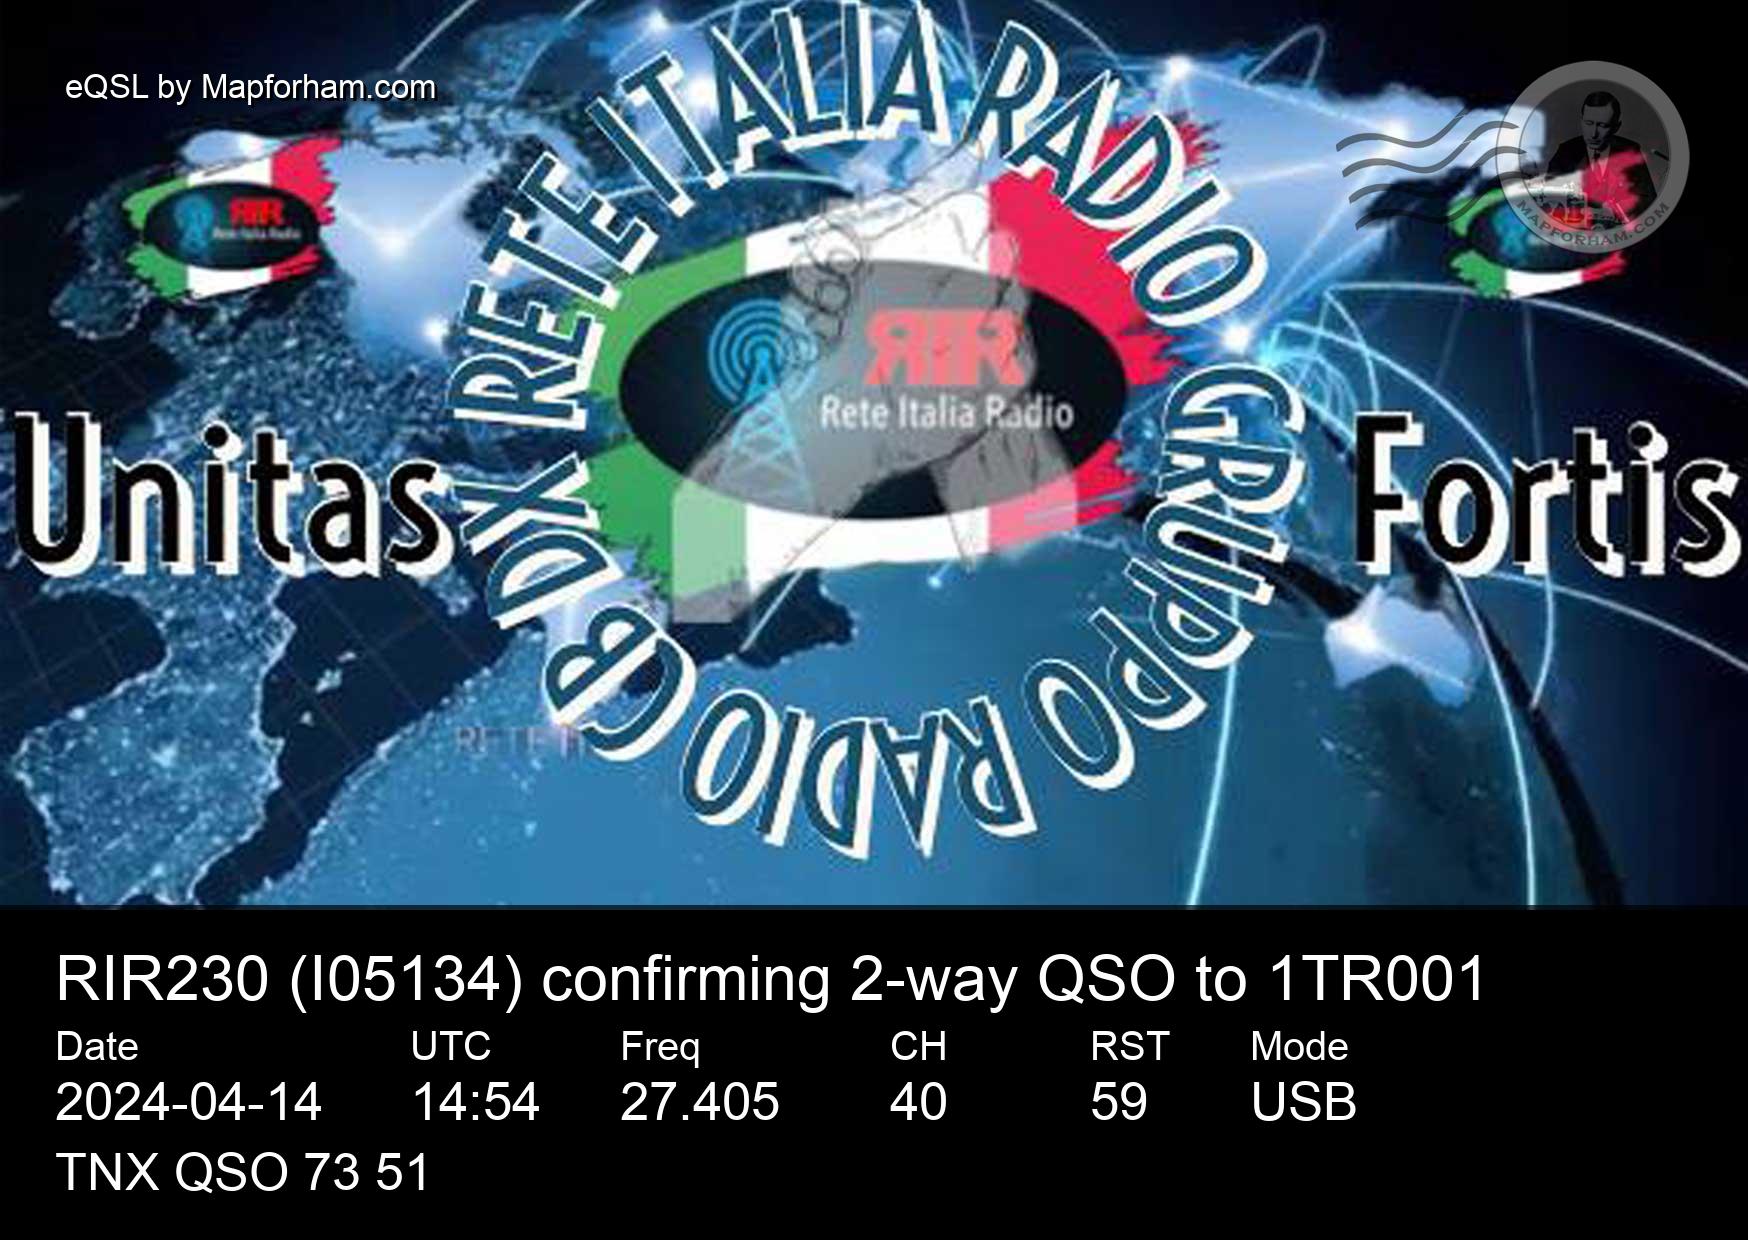 eQSL from RIR230 to 1TR001